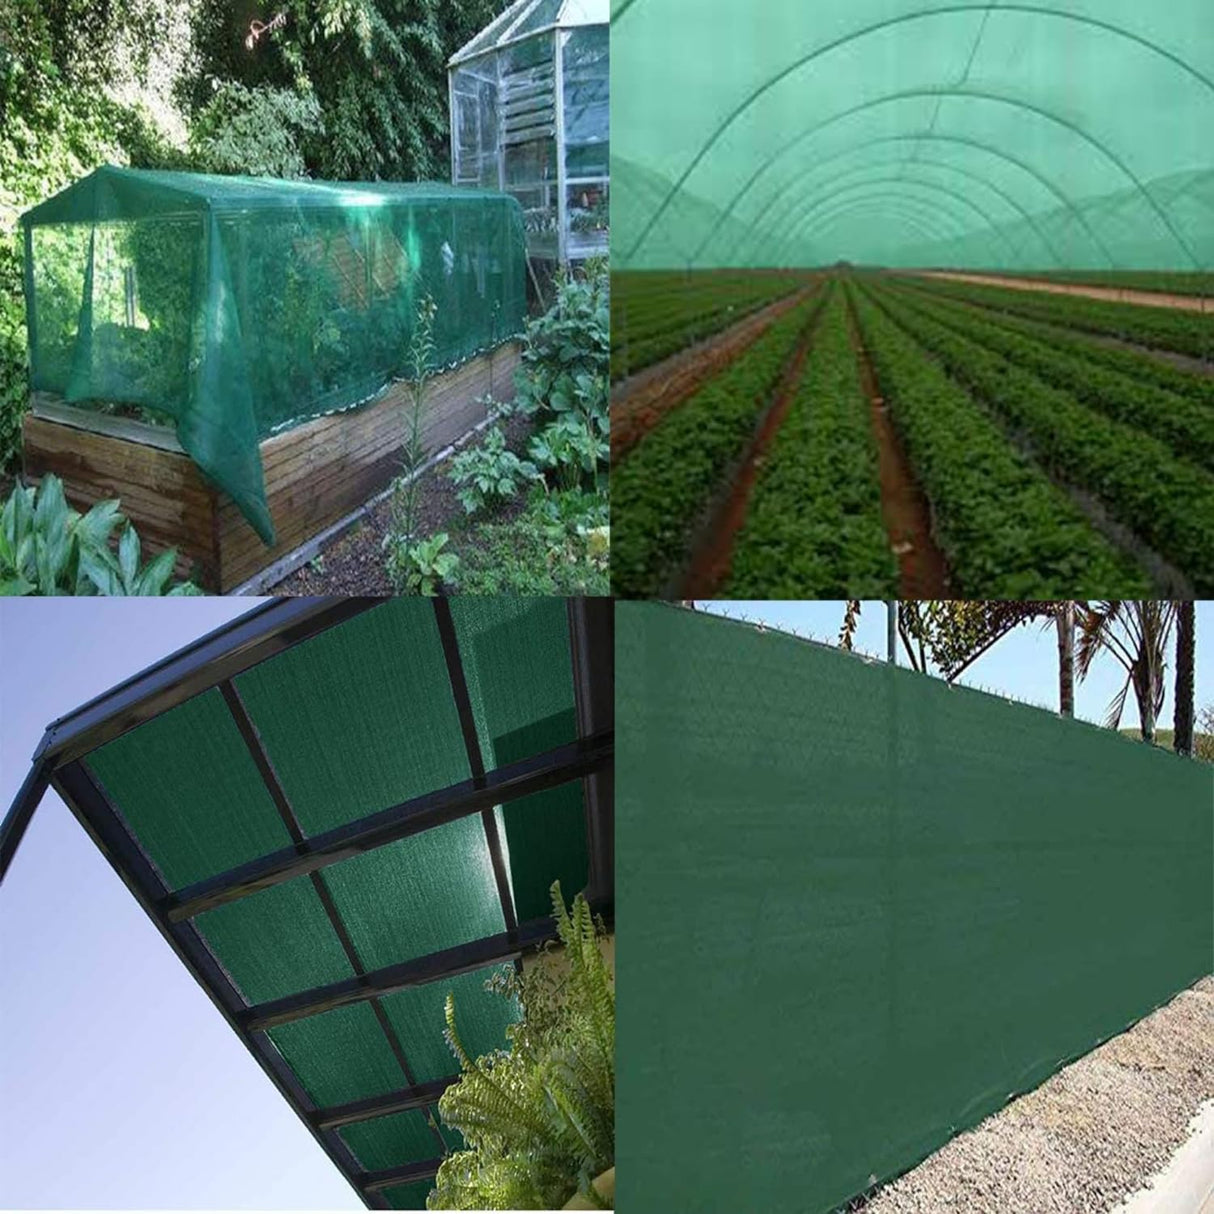 Singhal HDPE Nets Green Shade Net 50% UV Protected 3 Meter x 20 Meter for Floriculture, Ornamental Plants, Gardening Multipurpose with Attached Eyelets on Every Meter